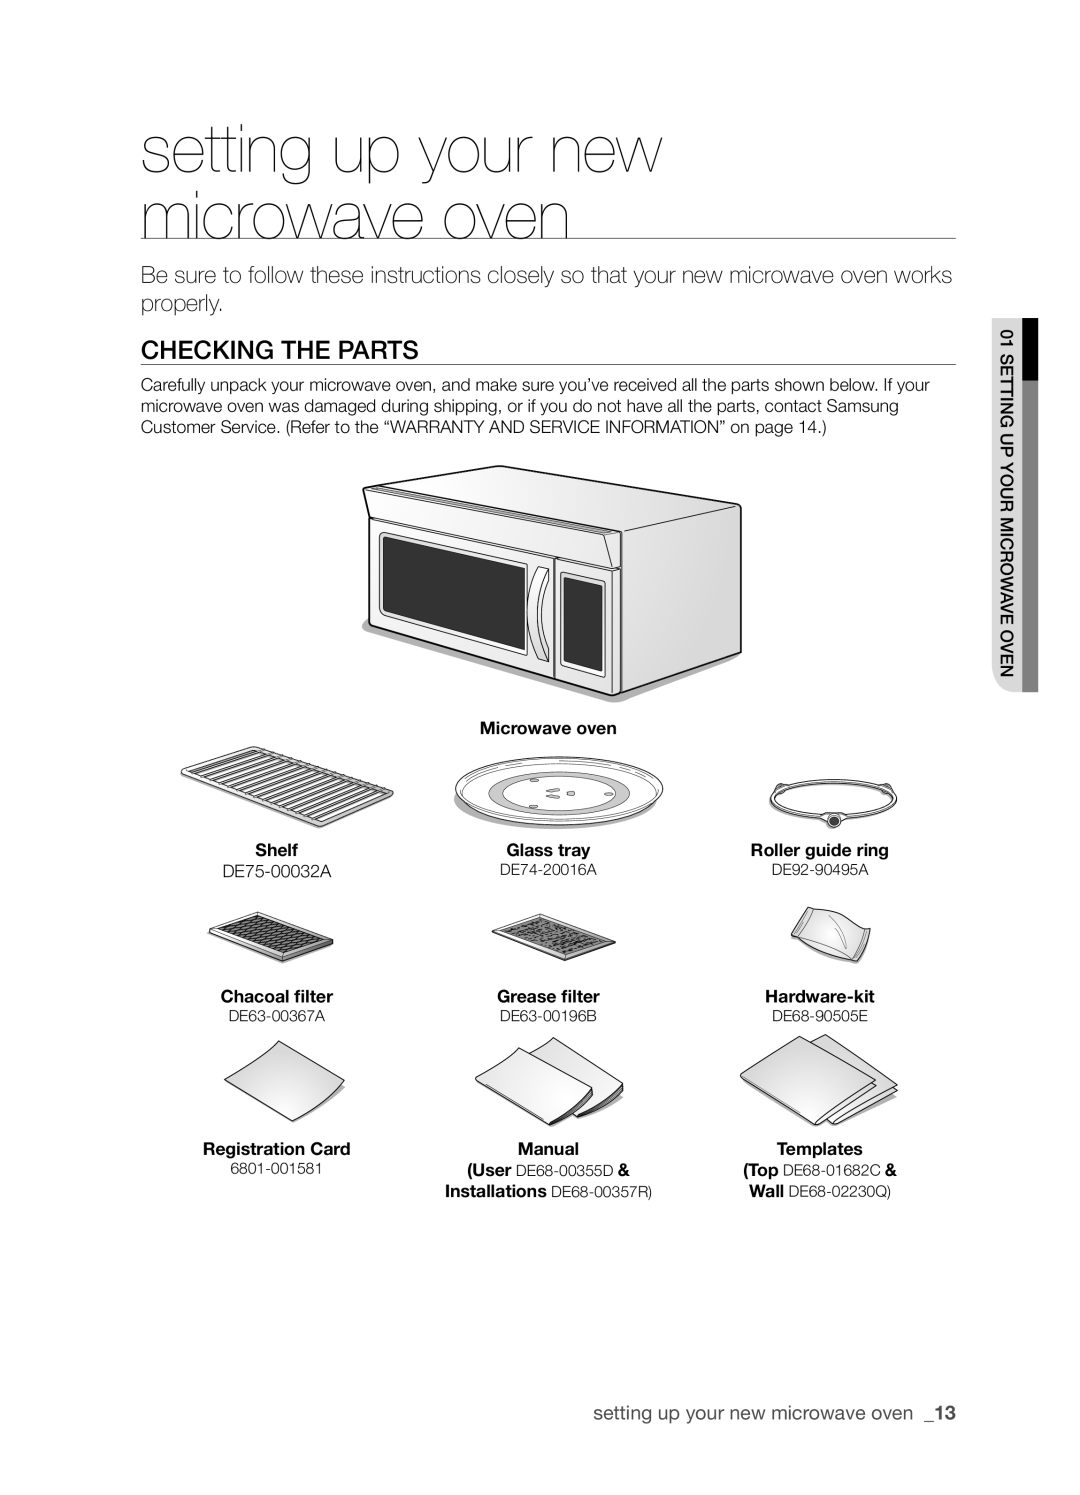 Samsung SMH8165STG setting up your new microwave oven, Checking the parts, Microwave oven, Shelf, Glass tray, Hardware-kit 